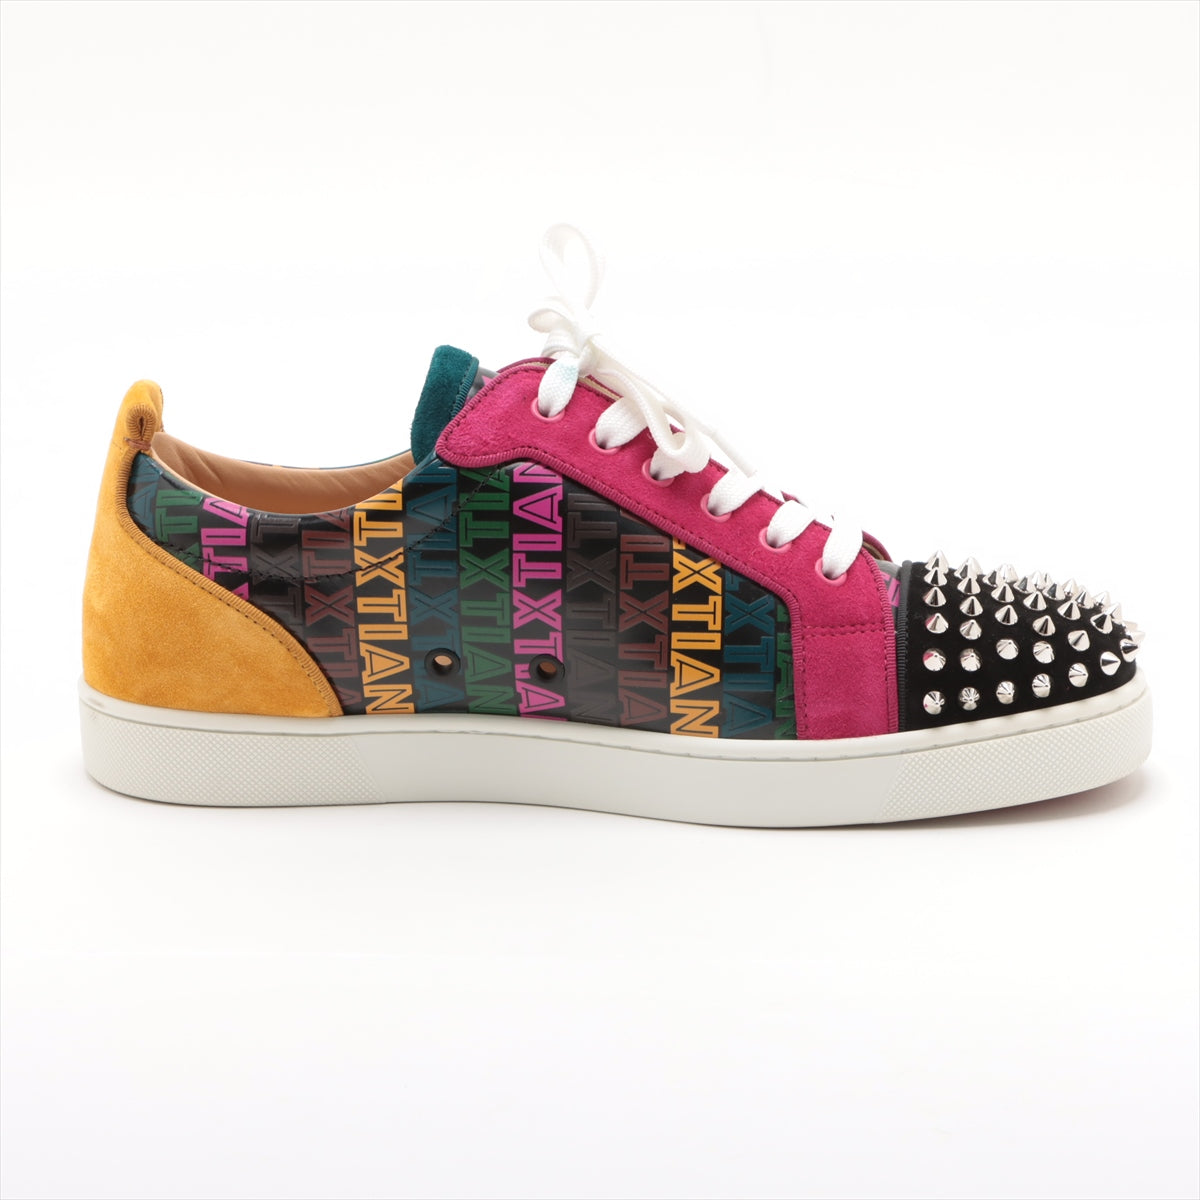 Christian Louboutin Leather & Suede Sneakers 42 1/2 Men's Multicolor LOUIS JUNIOR SPIKES ORLATO Spike Studs Replacement Laces Included